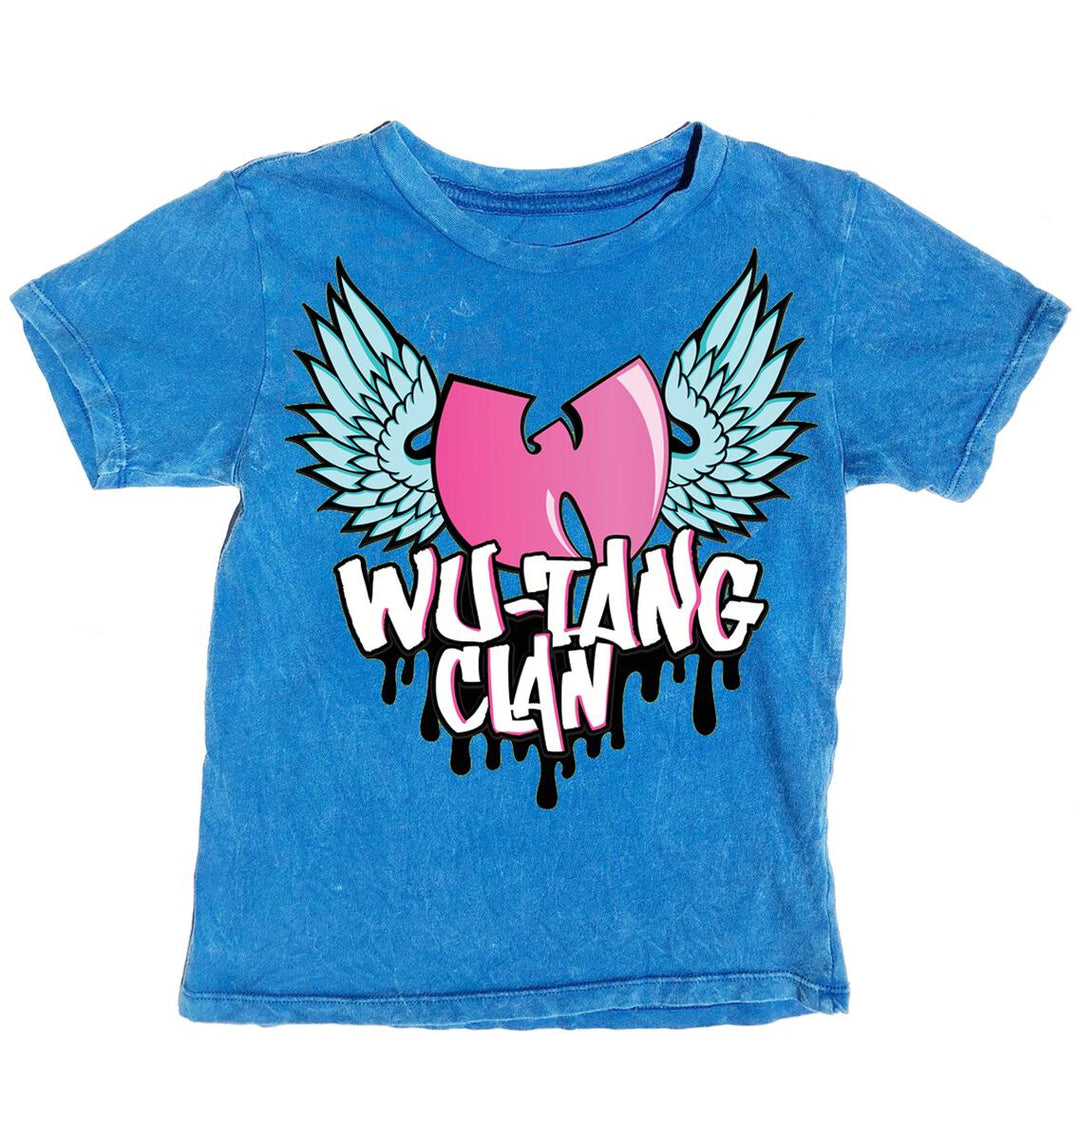 WuTang Organic Tee by Rowdy Sprout